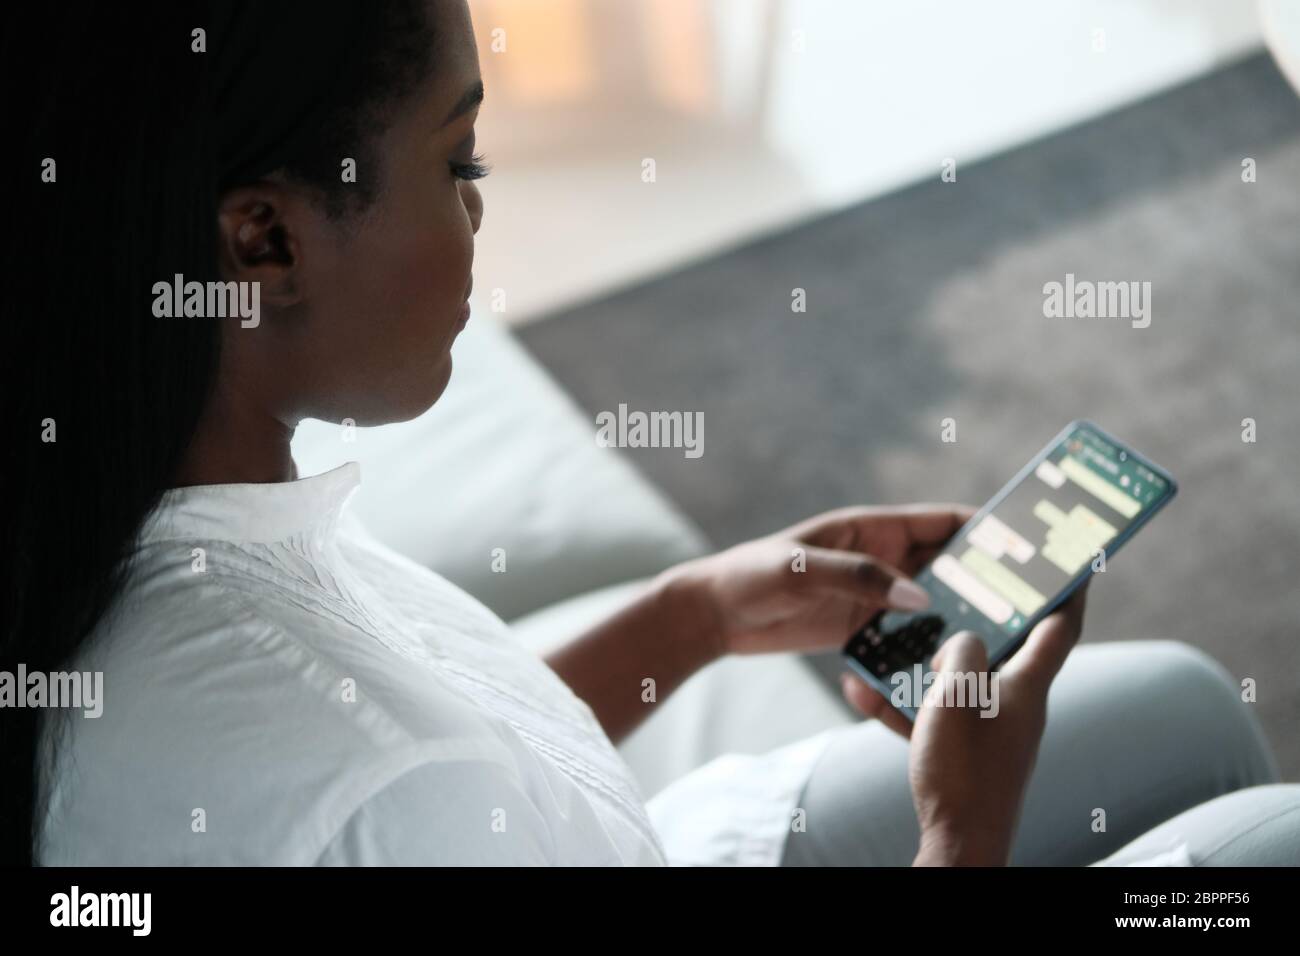 Black Woman Using Mobile Phone For Text Messaging Stock Photo